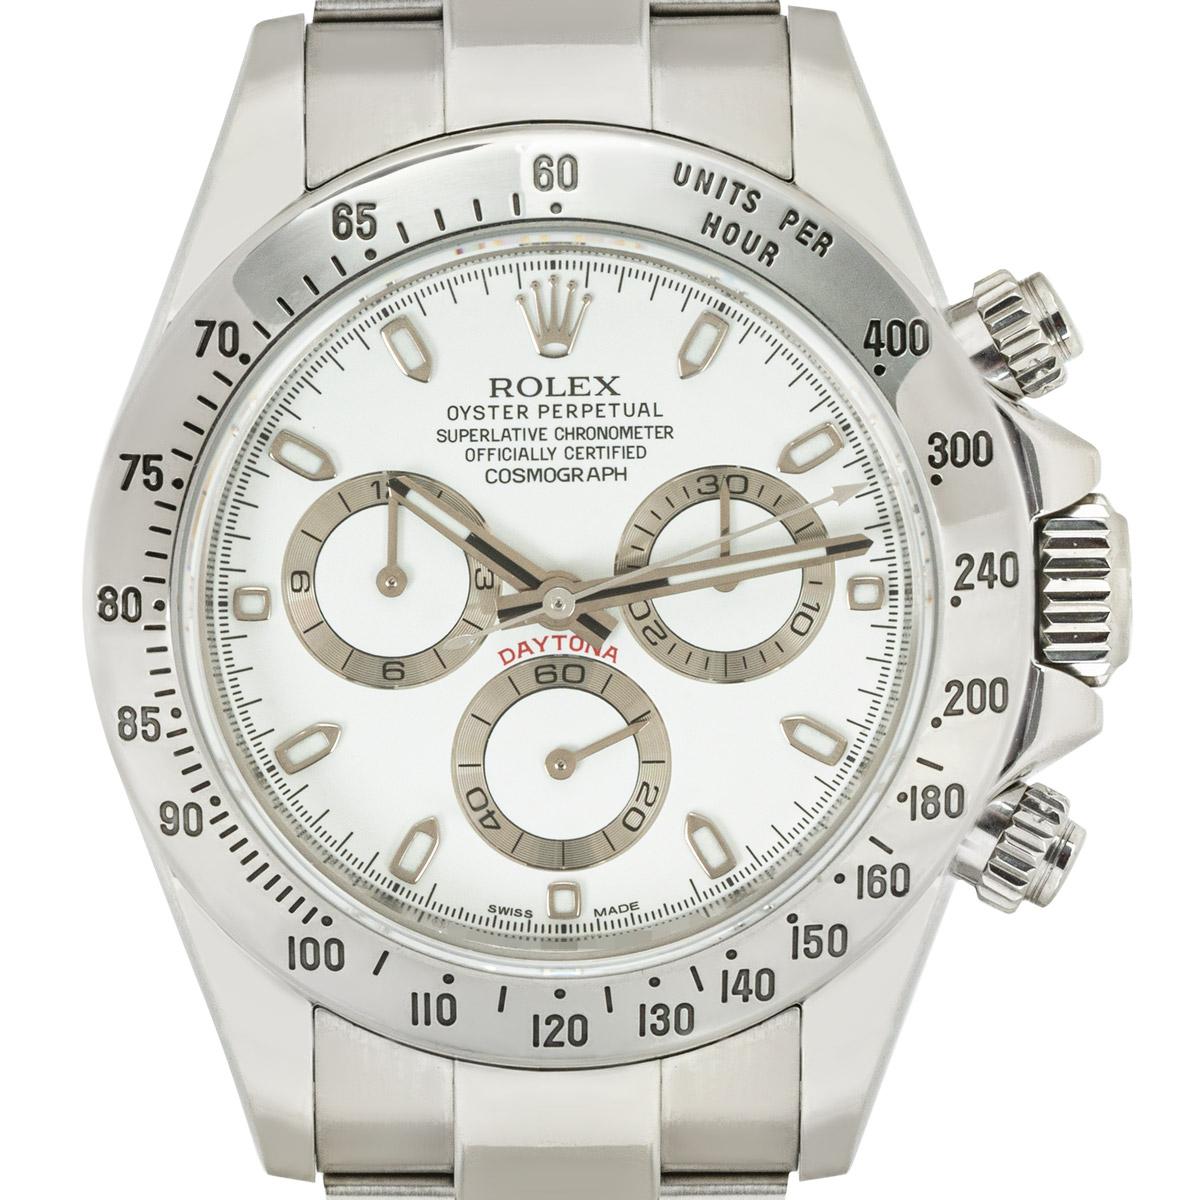 A Daytona in Oystersteel by Rolex, featuring a unique APH error white dial. With an engraved tachymetric scale, three counters and pushers; the Daytona was designed to be the ultimate timing tool for endurance racing drivers.

The Oyster bracelet is